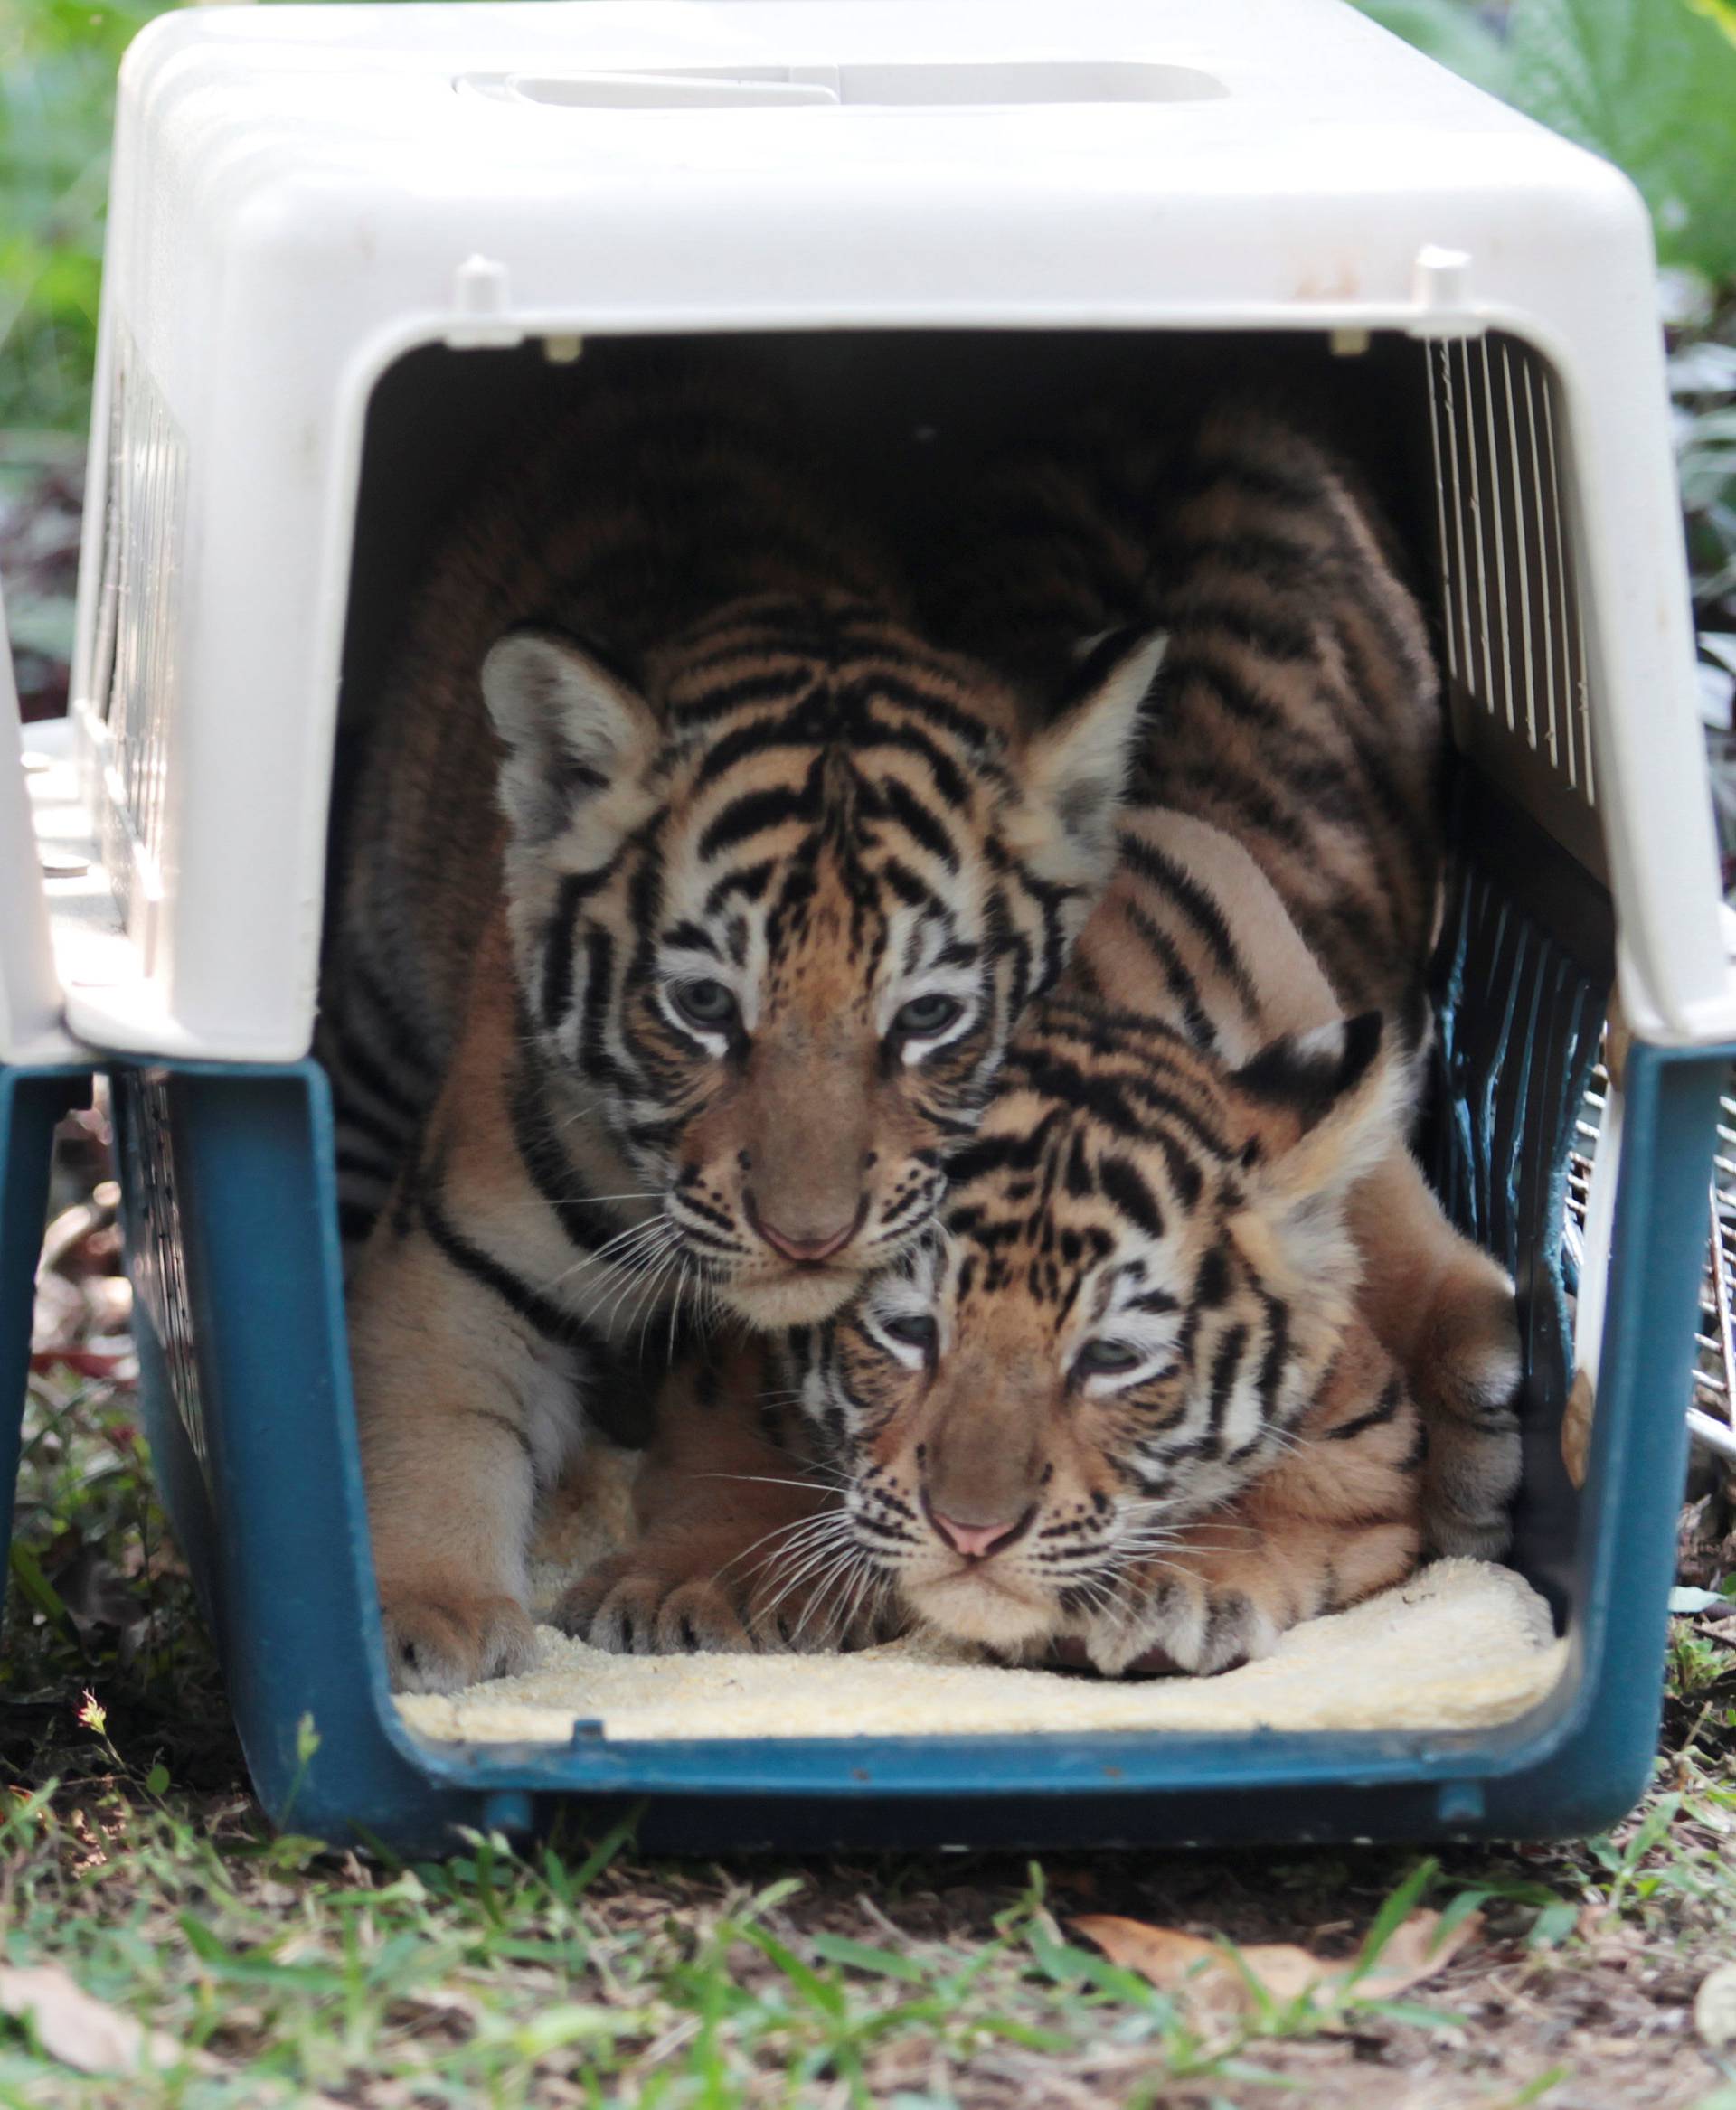 One-month old Bengal tiger cubs are seen in their kennels at the Animal Refuge Fundacion Refugio Salvaje (FURESA) in Jayaque